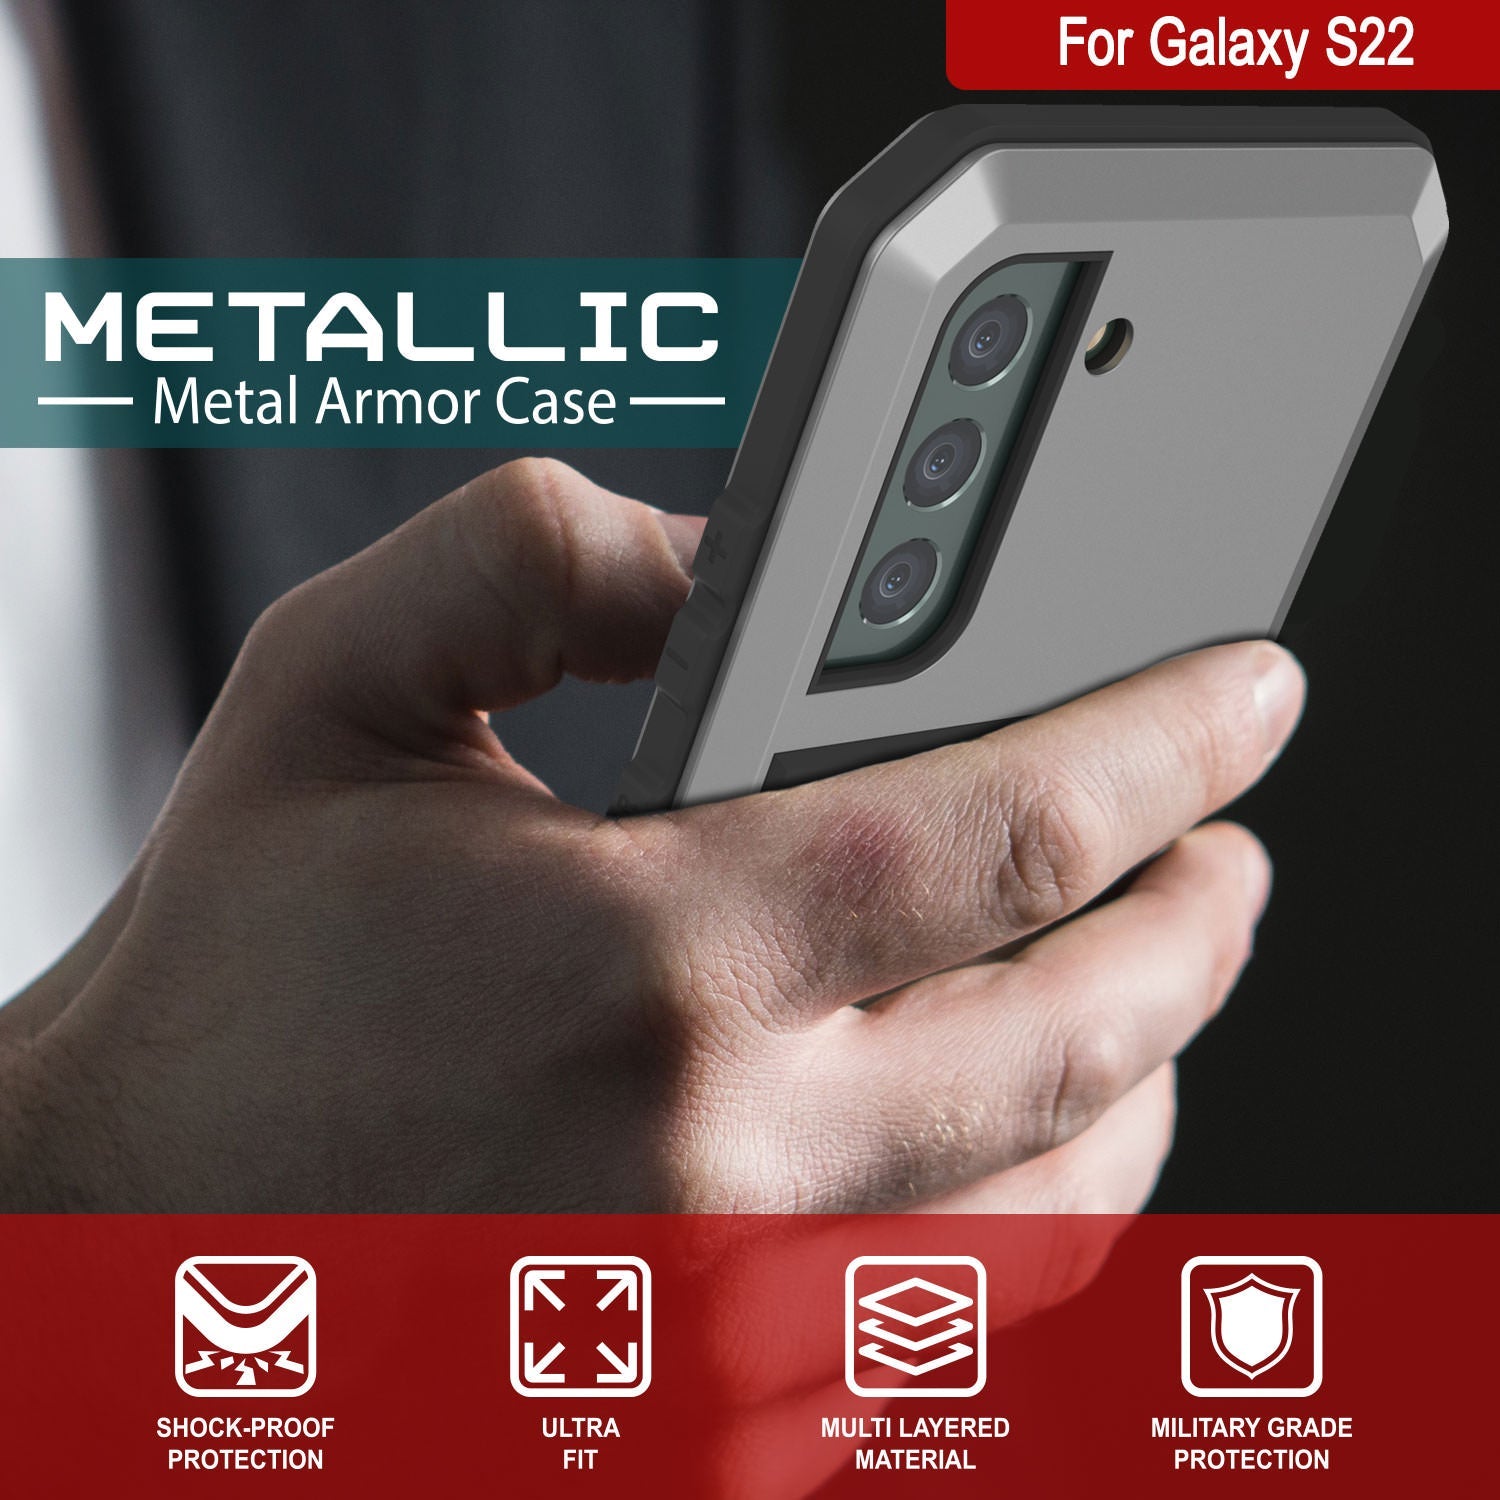 Galaxy S22 Metal Case, Heavy Duty Military Grade Rugged Armor Cover [Silver]